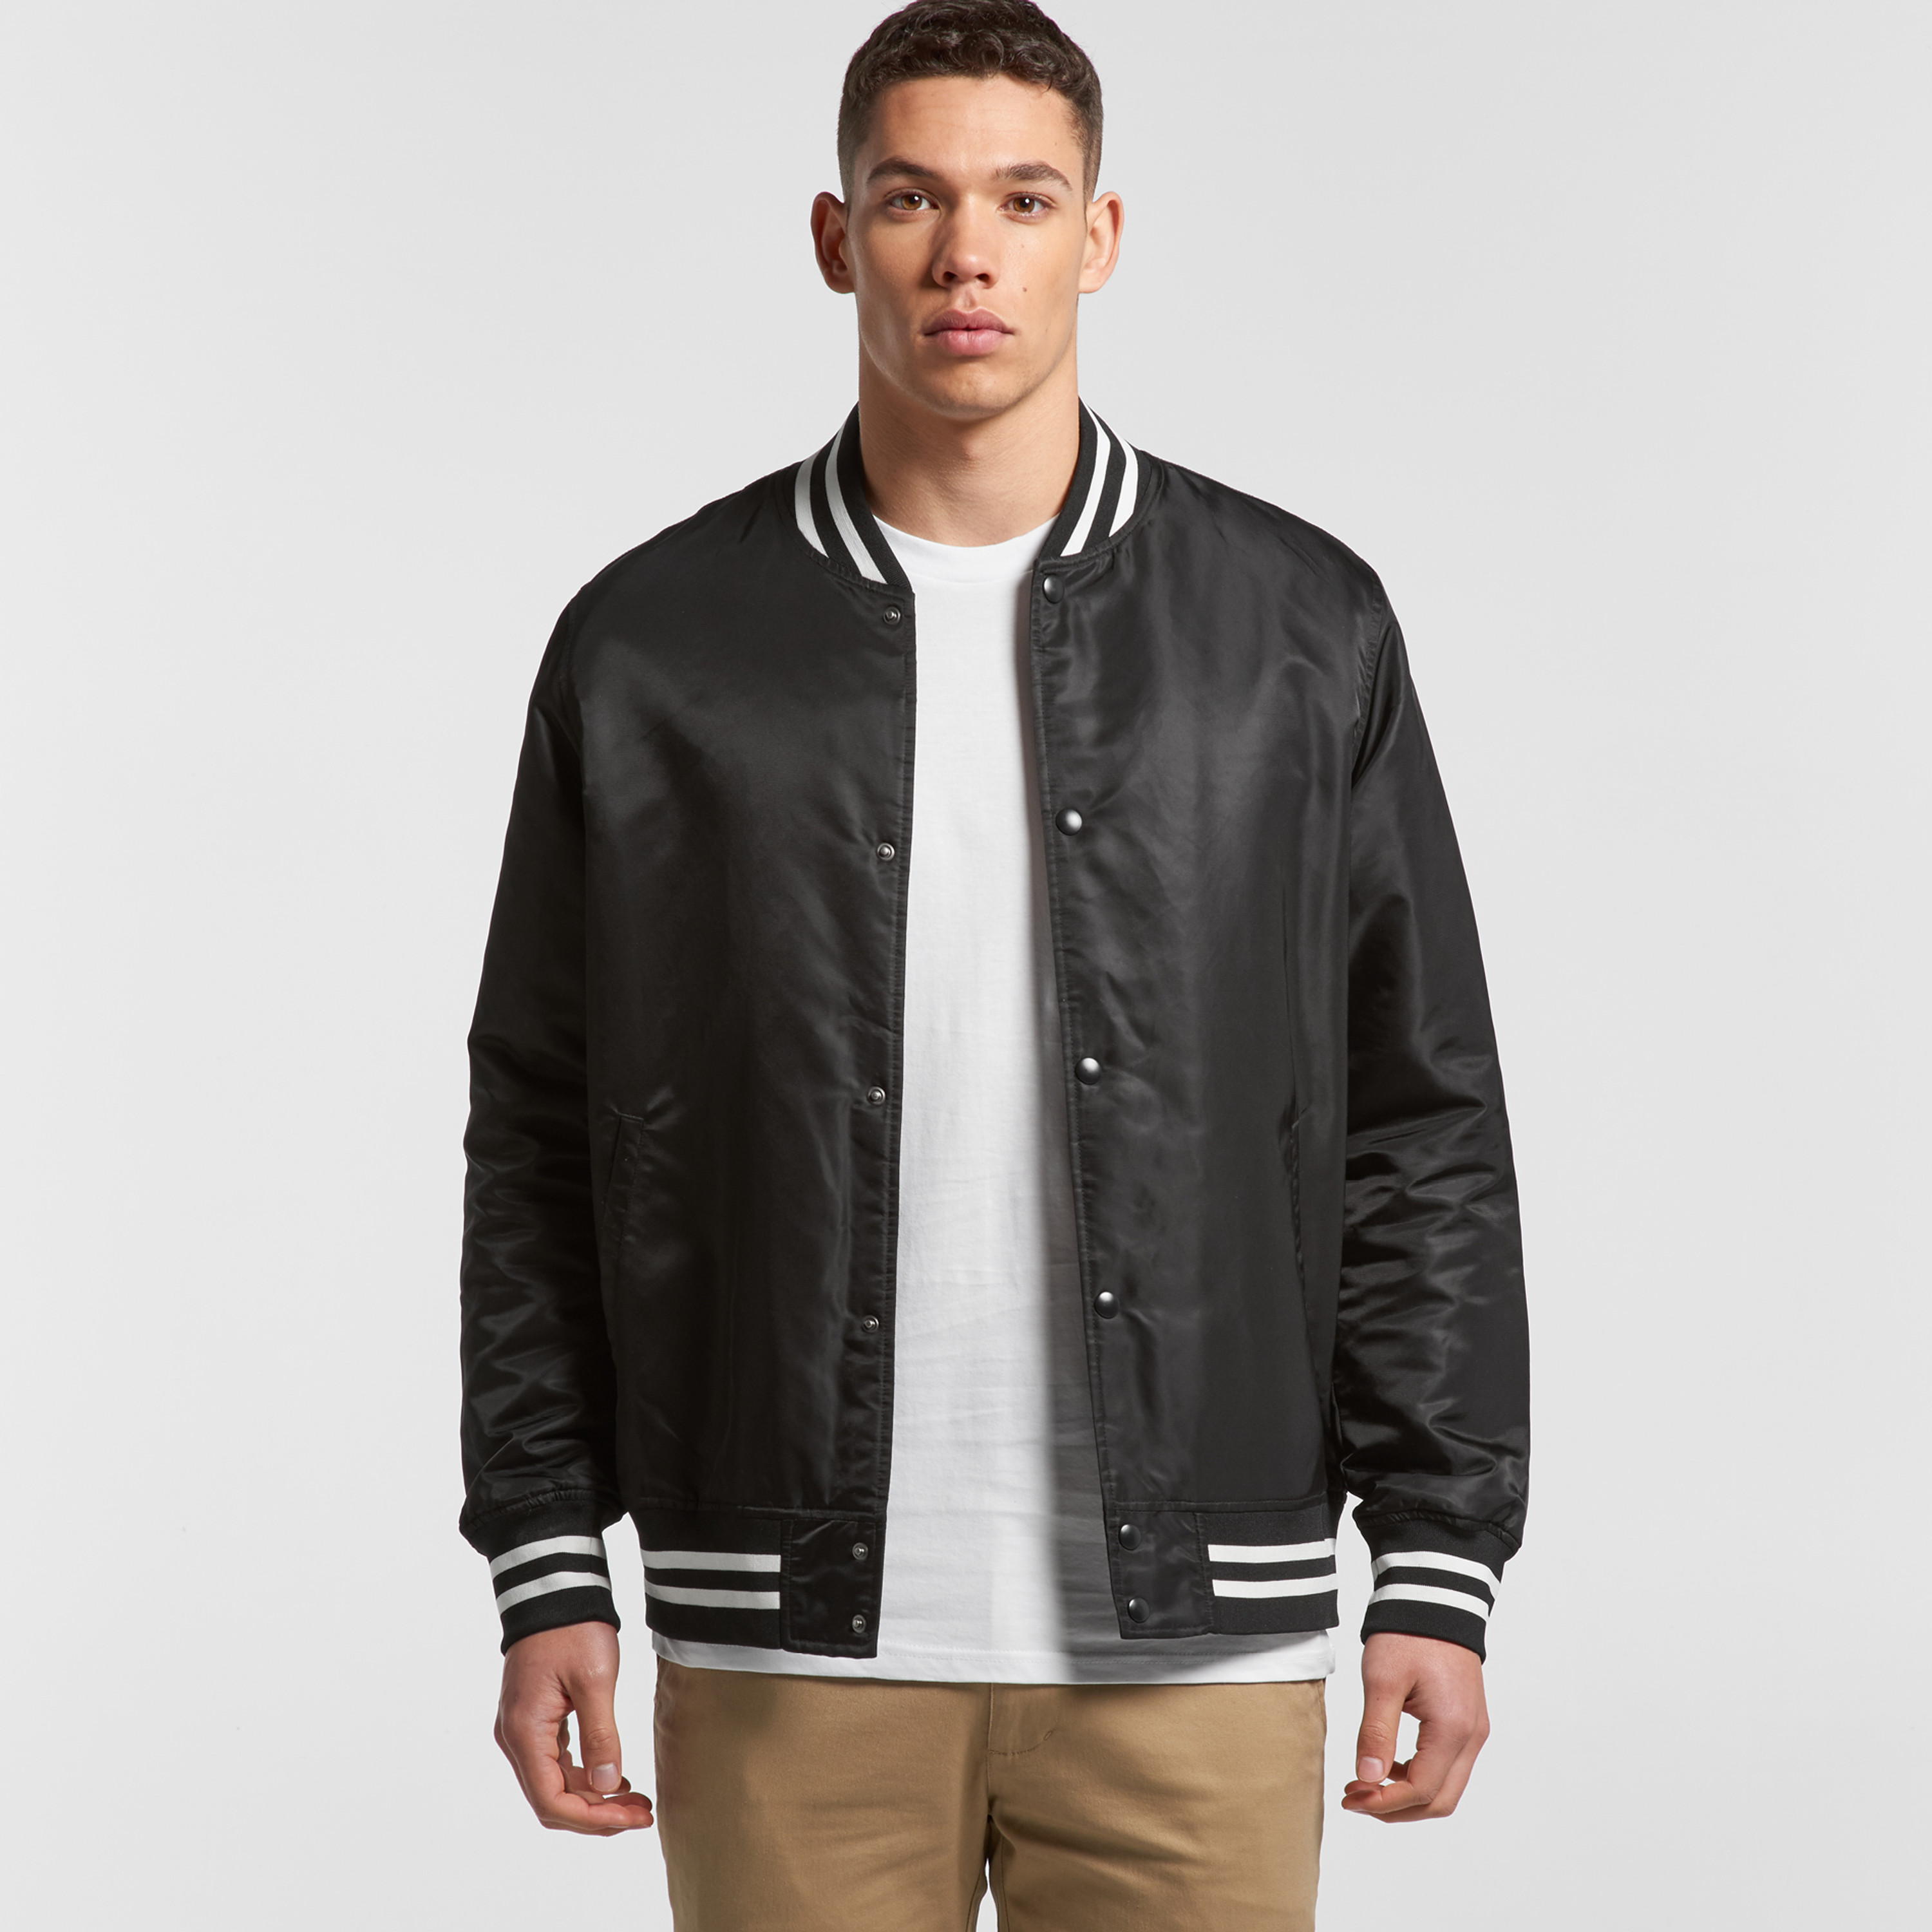 College Bomber Jacket - 5510 - AS Colour UK